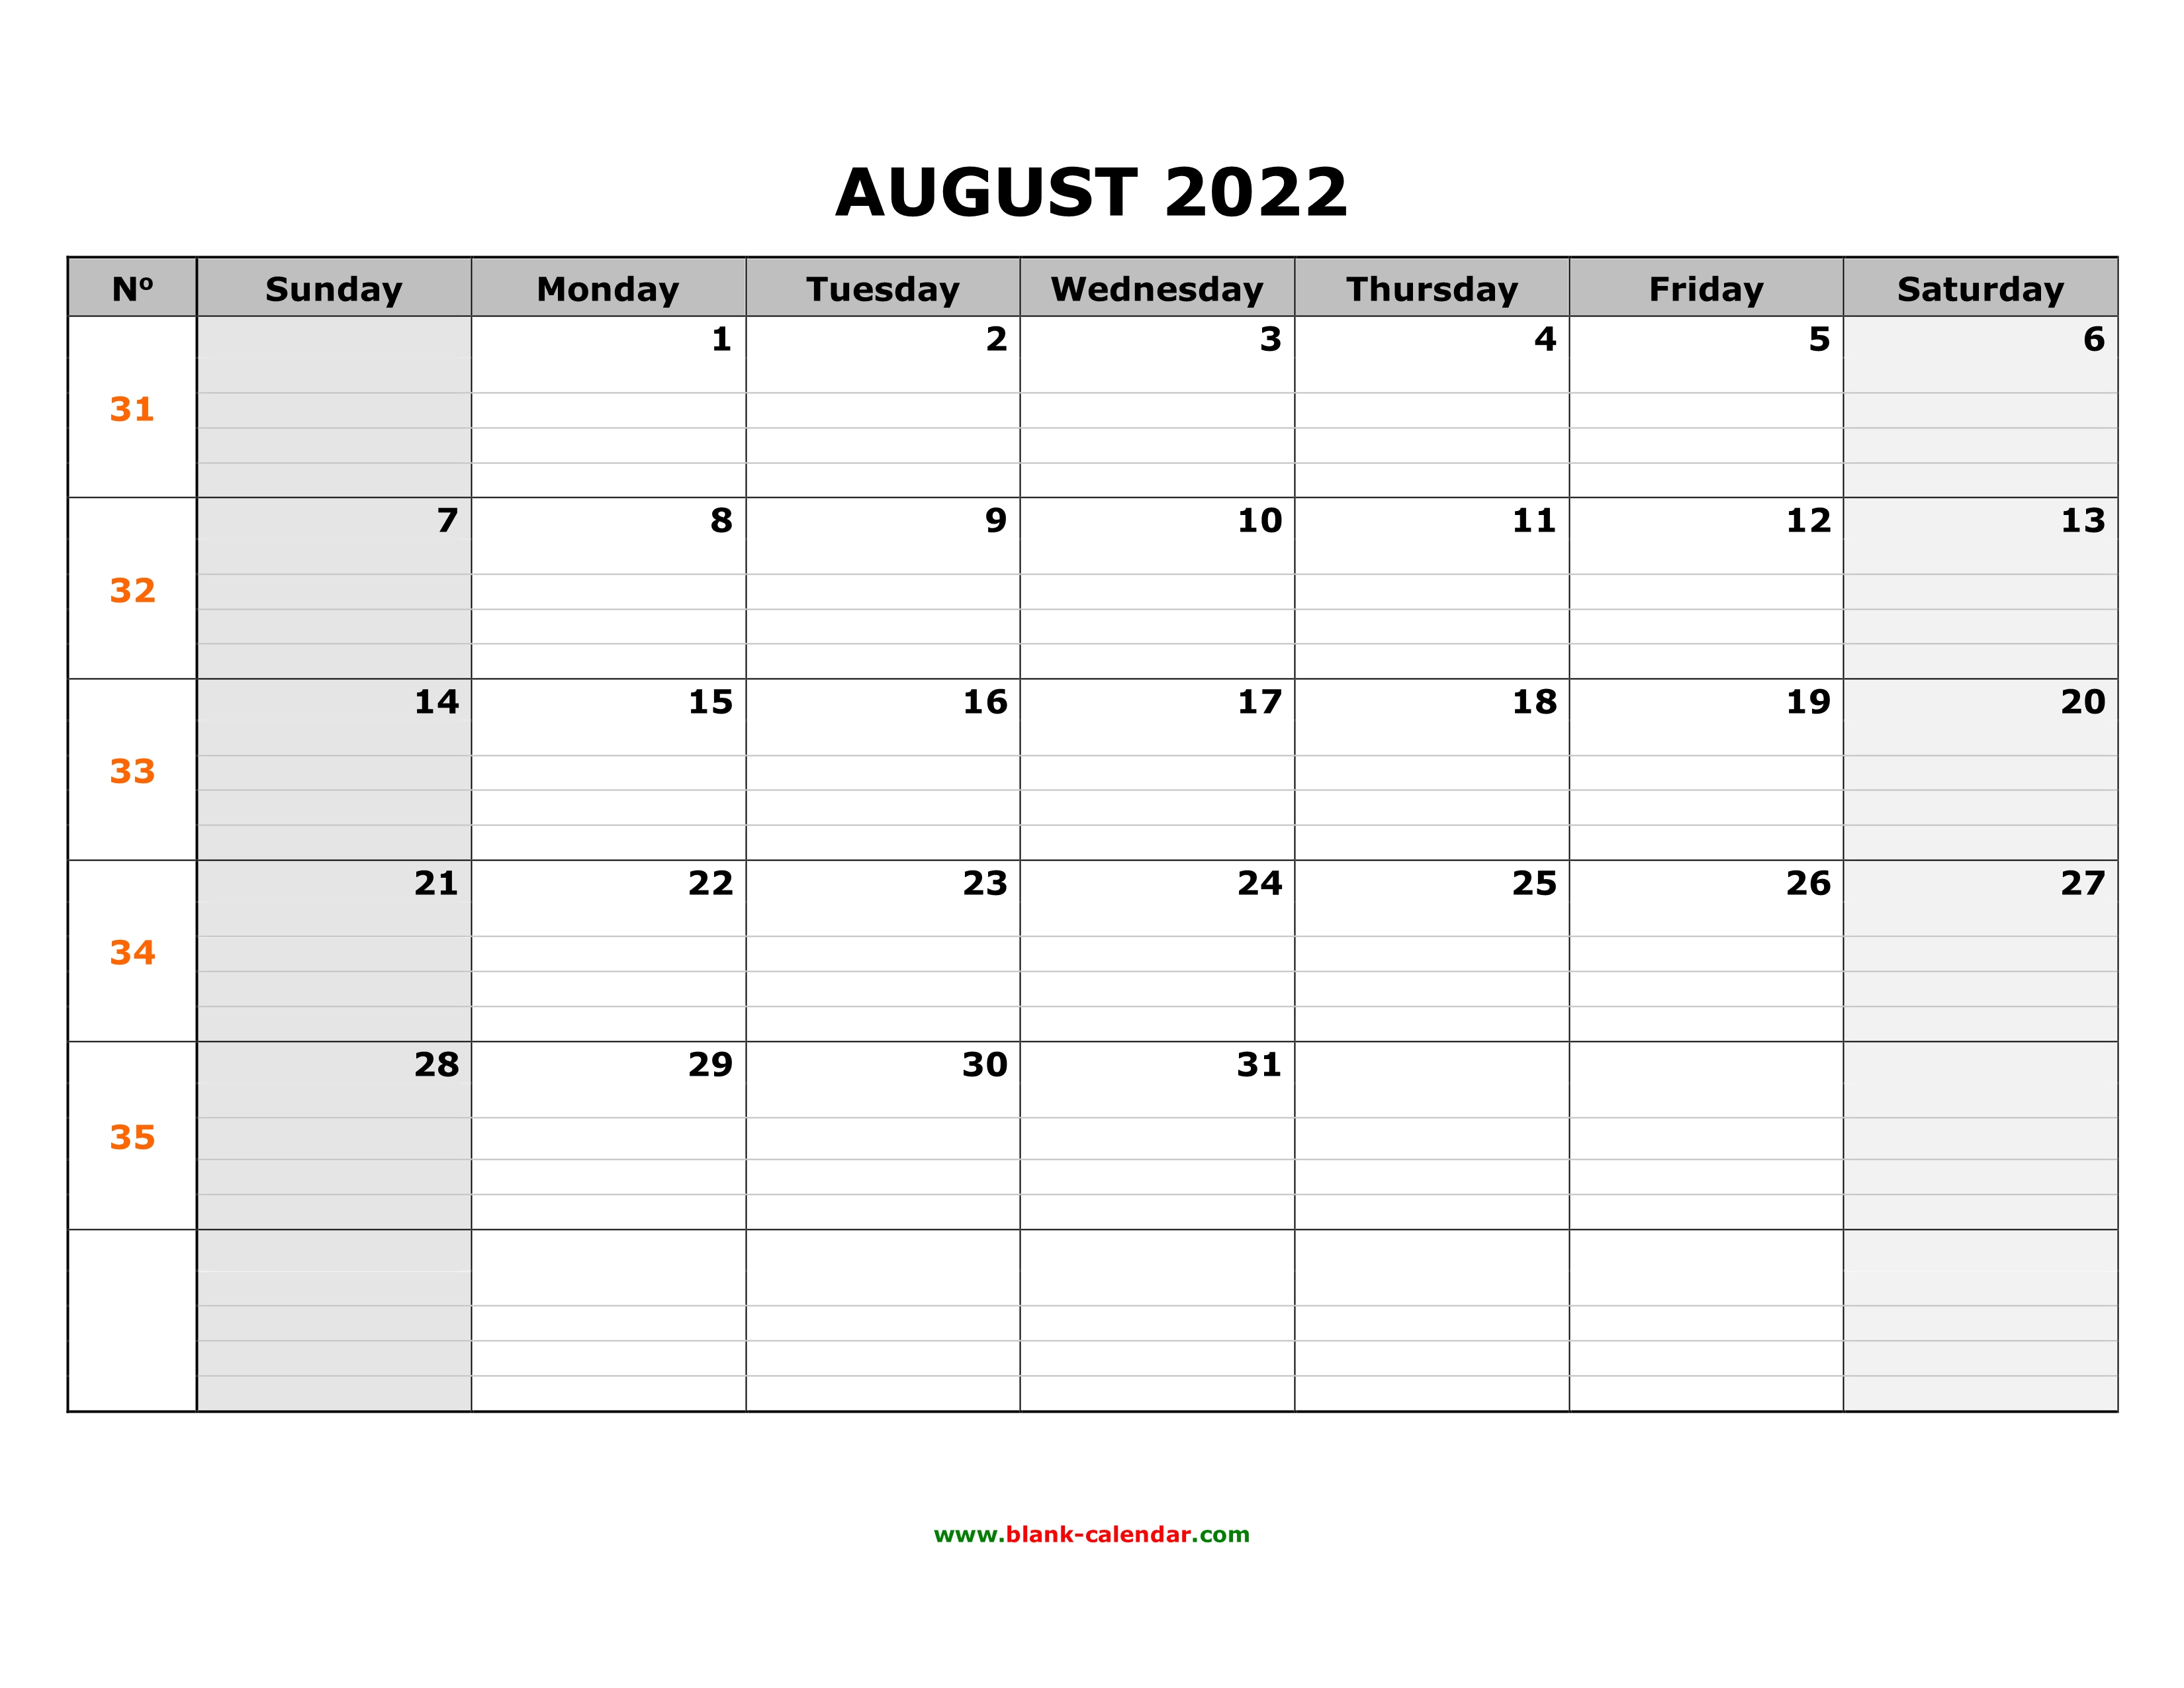 Free Download Printable August 2022 Calendar, large box grid, space for